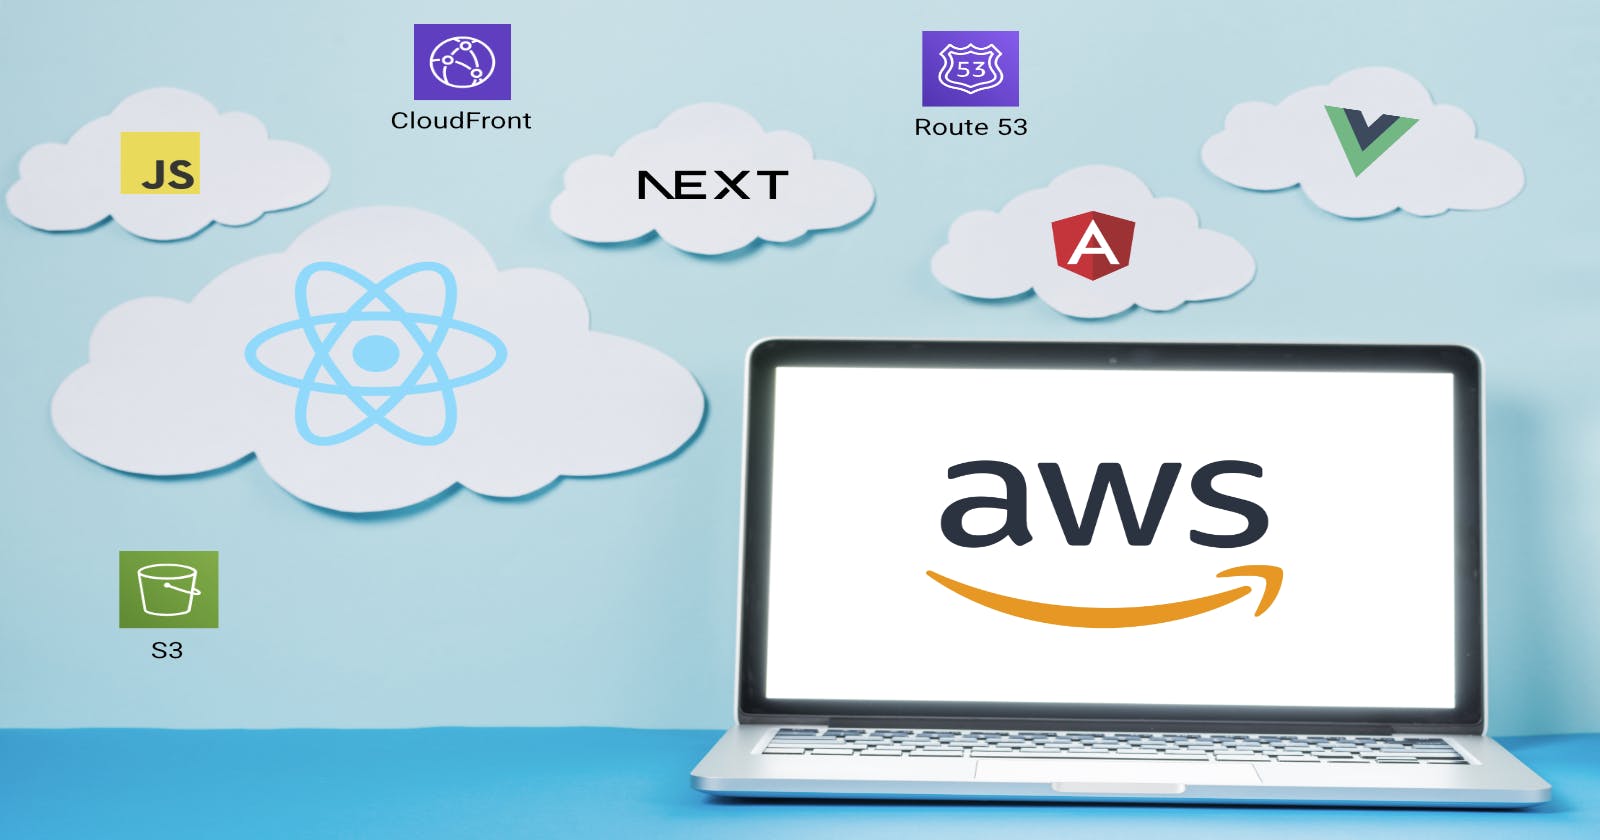 Deploying your application on AWS